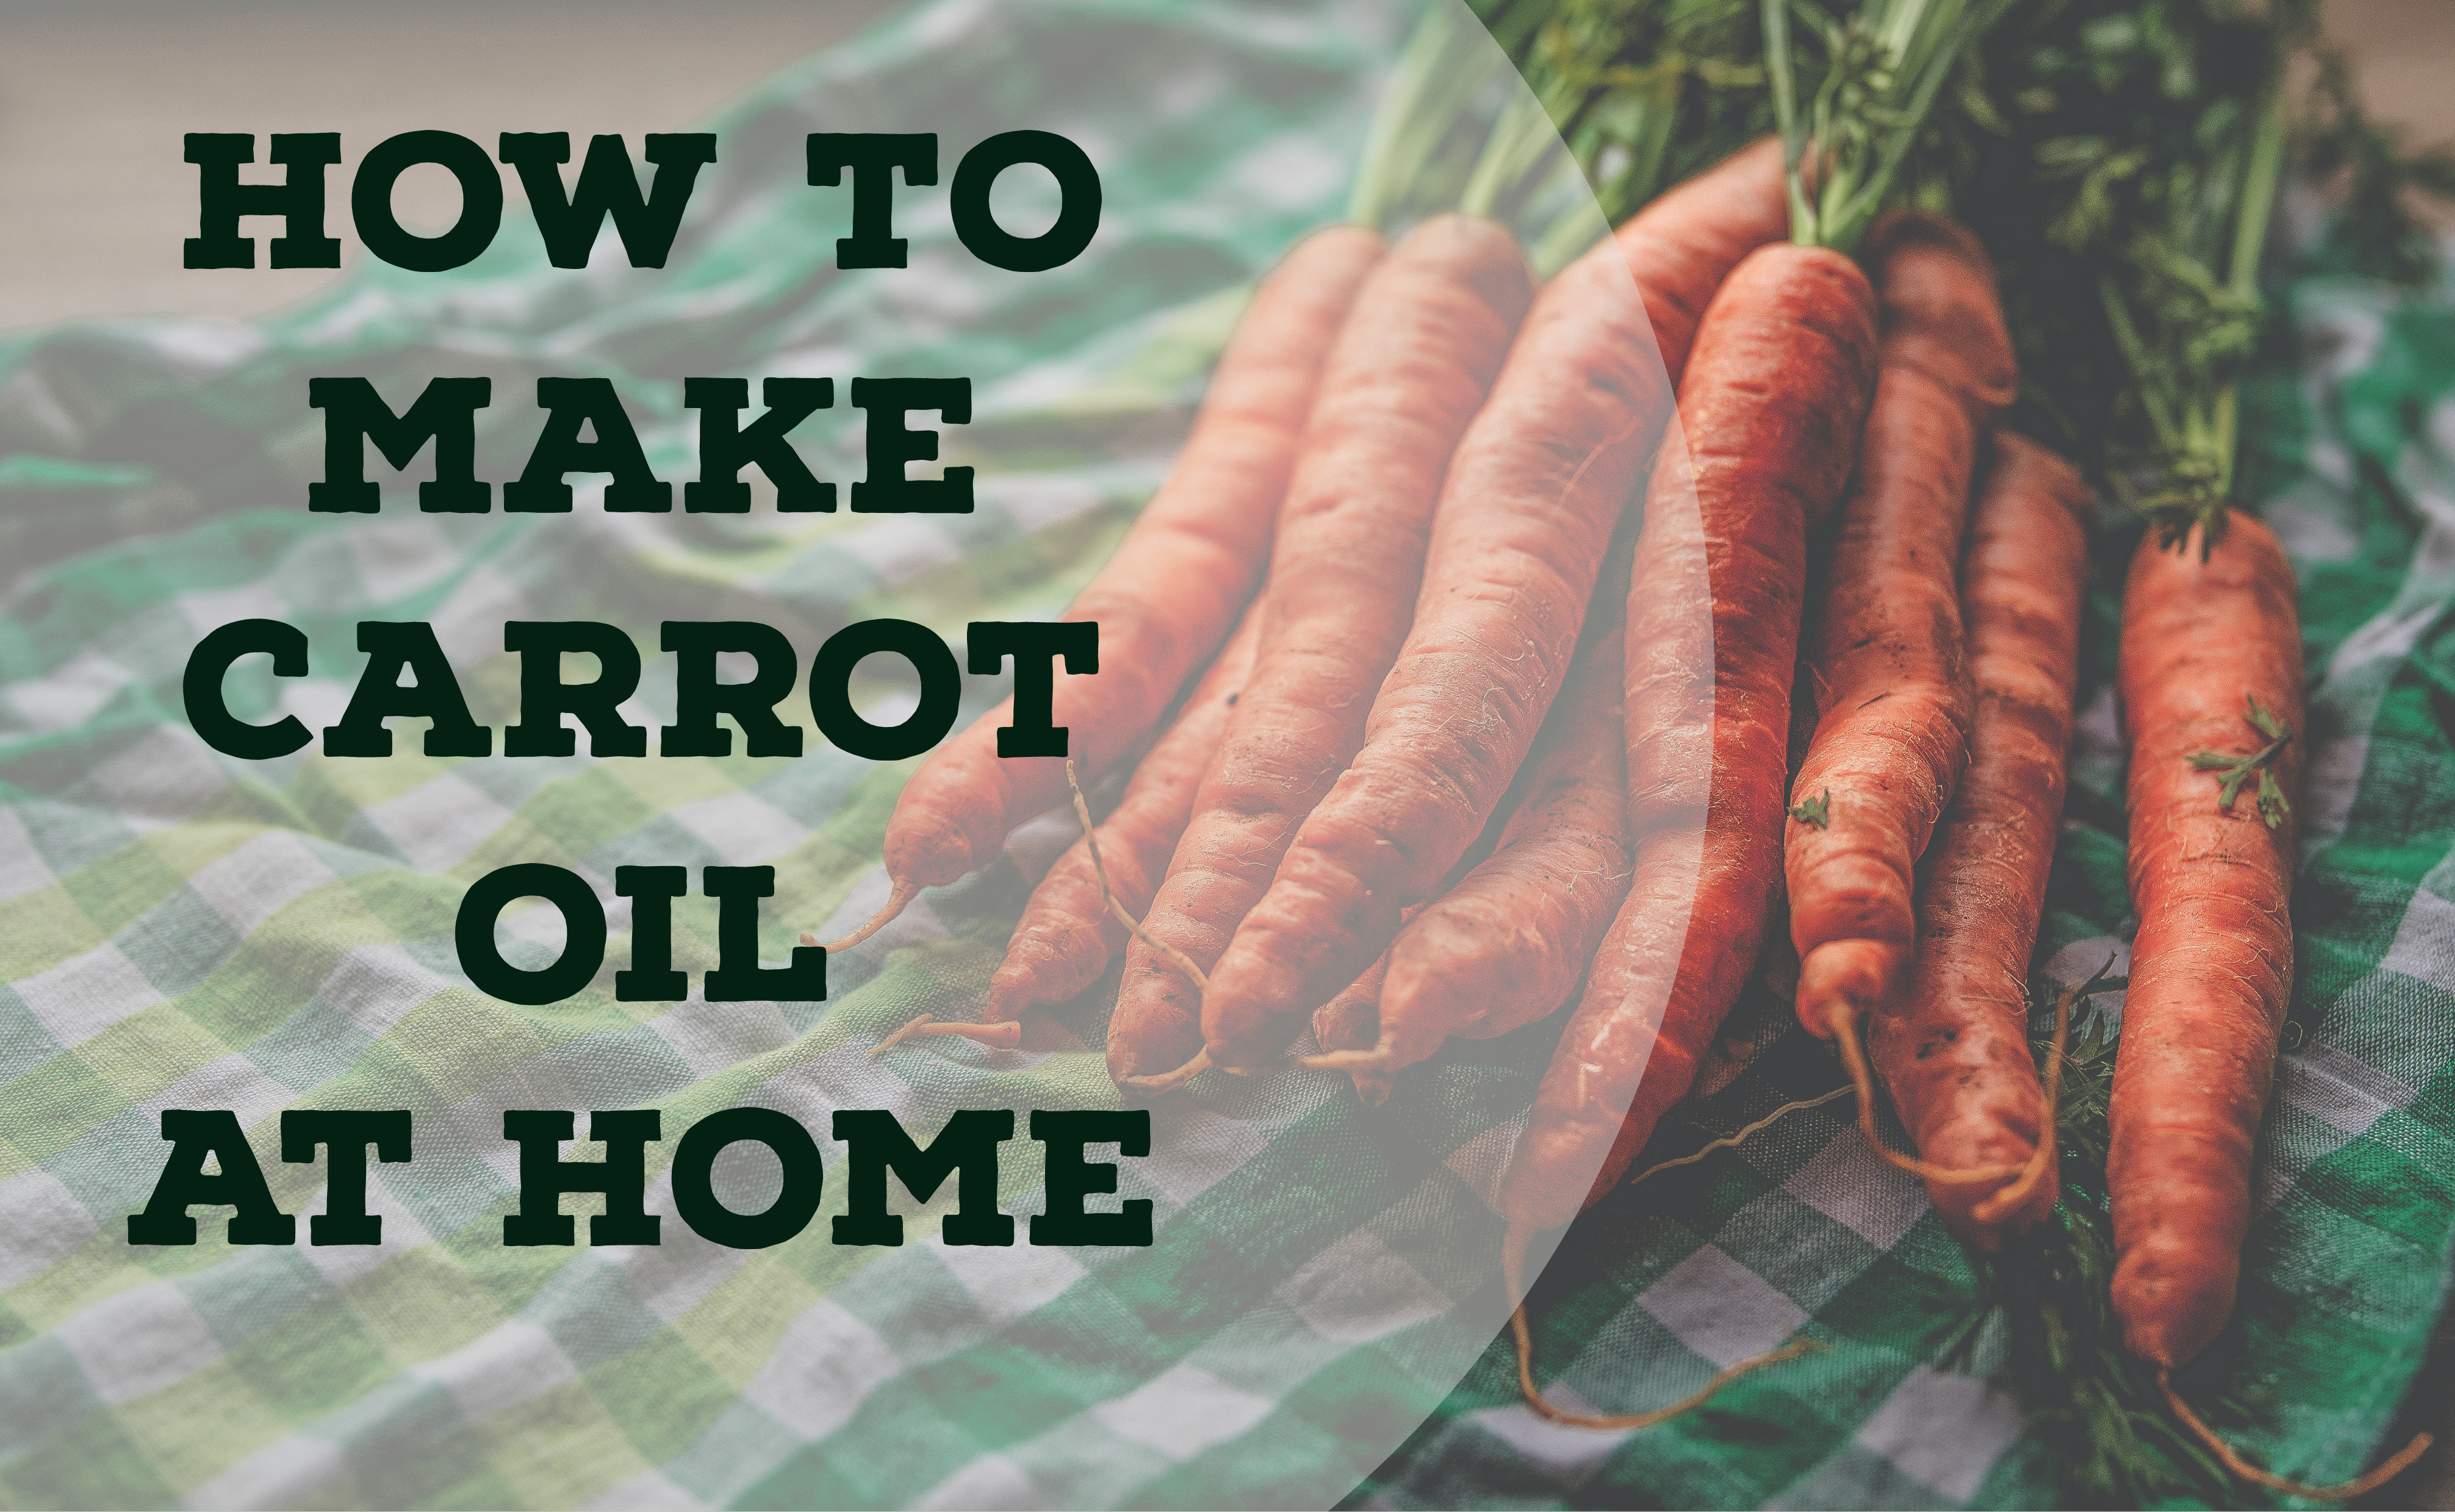 How to make carrot oil at home